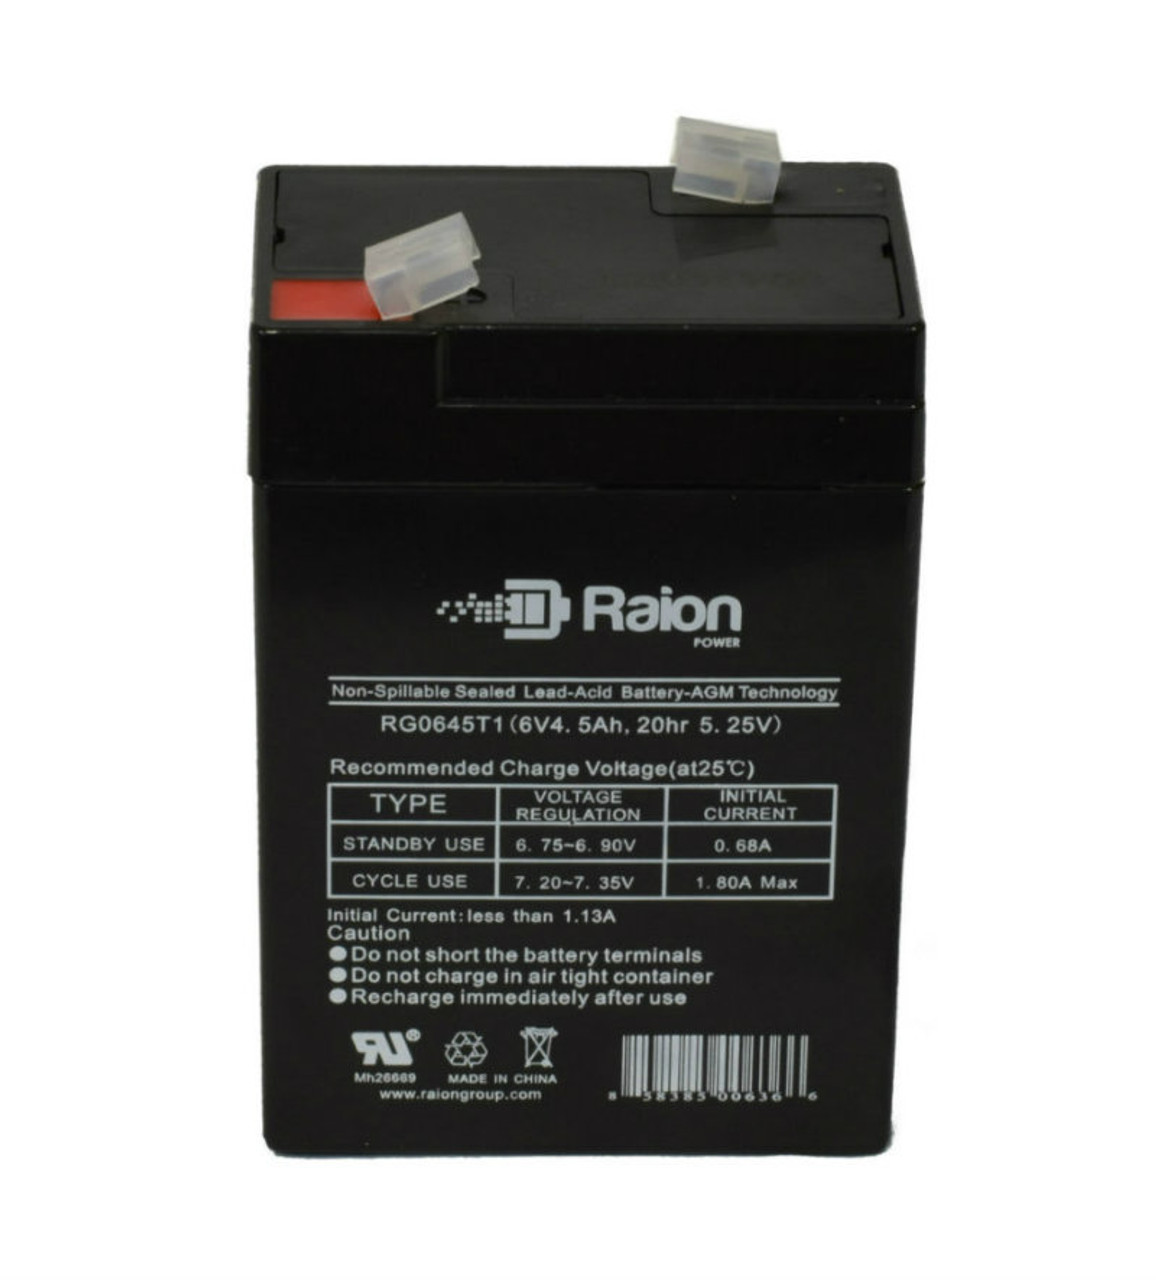 Raion Power RG0645T1 Replacement Battery Cartridge for Sureway SW-1003